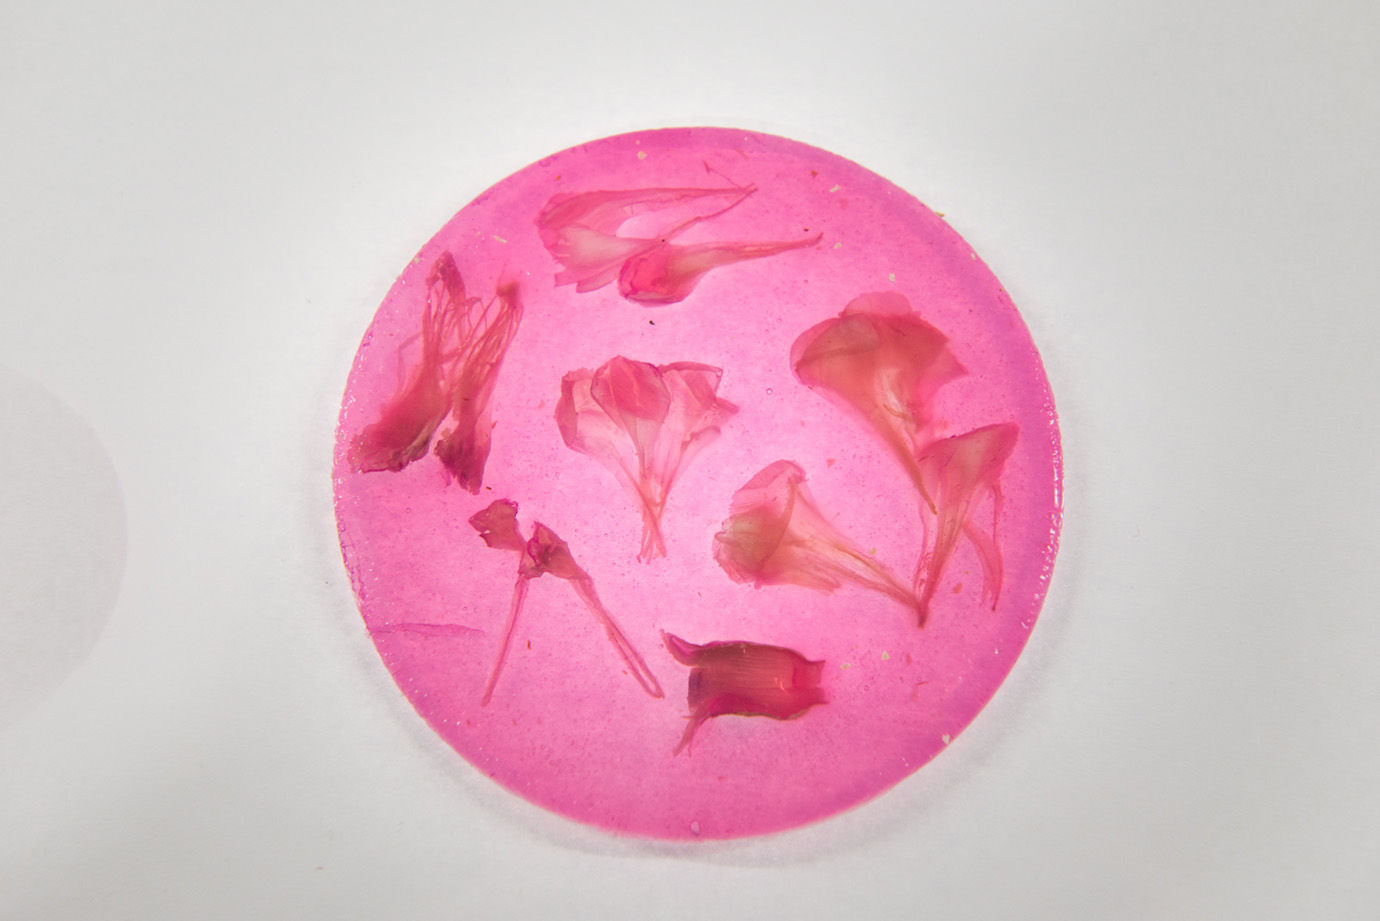 pink coloured round biomaterial sample 